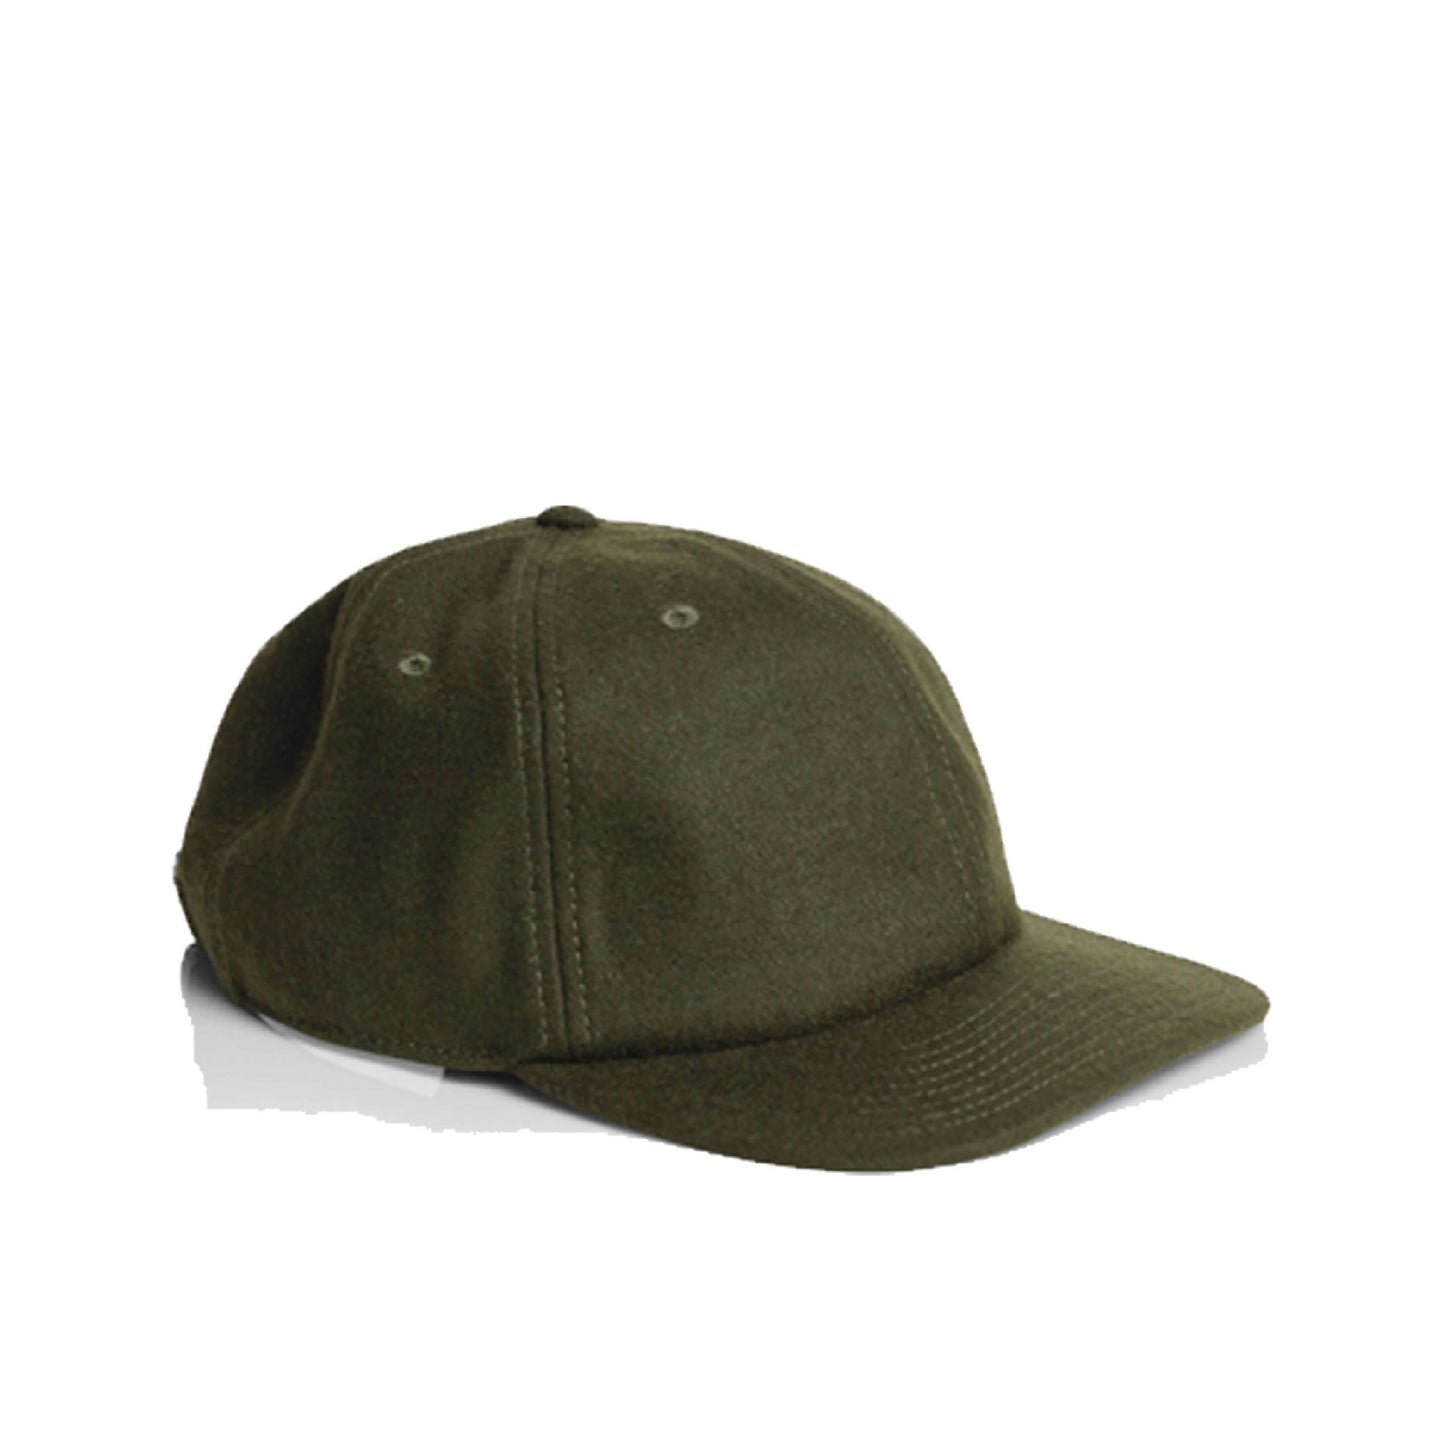 Unstructured Mid Profile Class Wool Cap